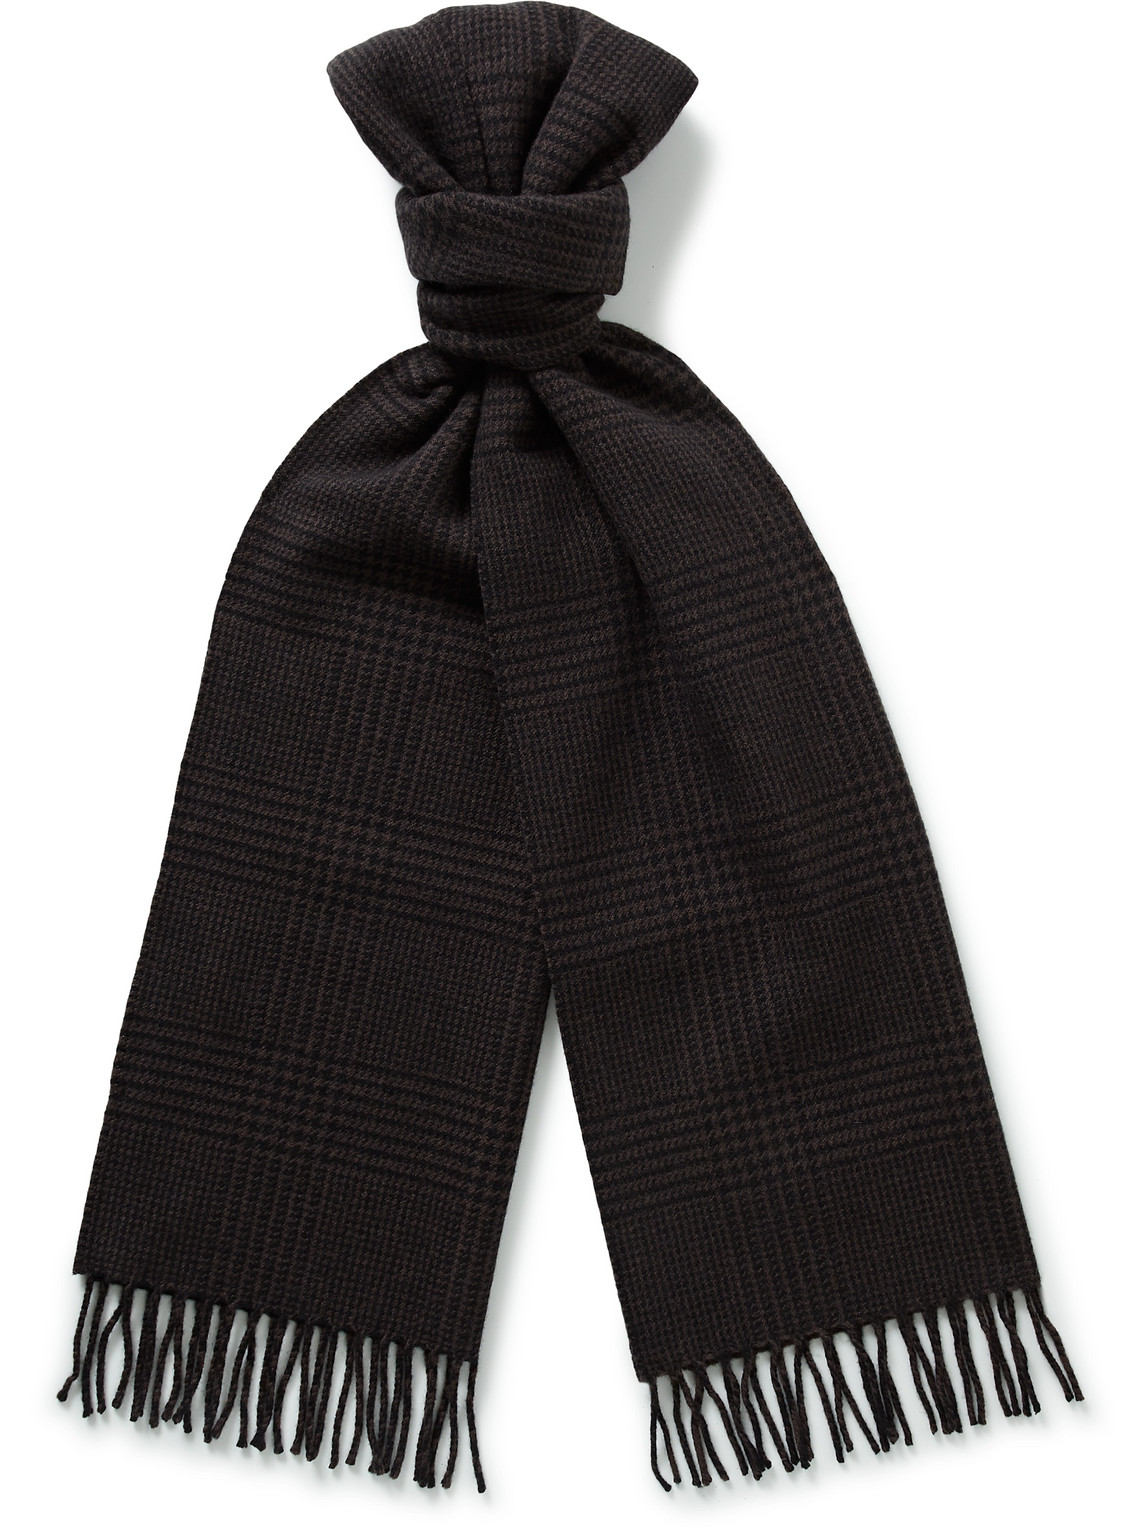 Logo-Appliquéd Fringed Prince of Wales Checked Cashmere and Wool-Blend Scarf